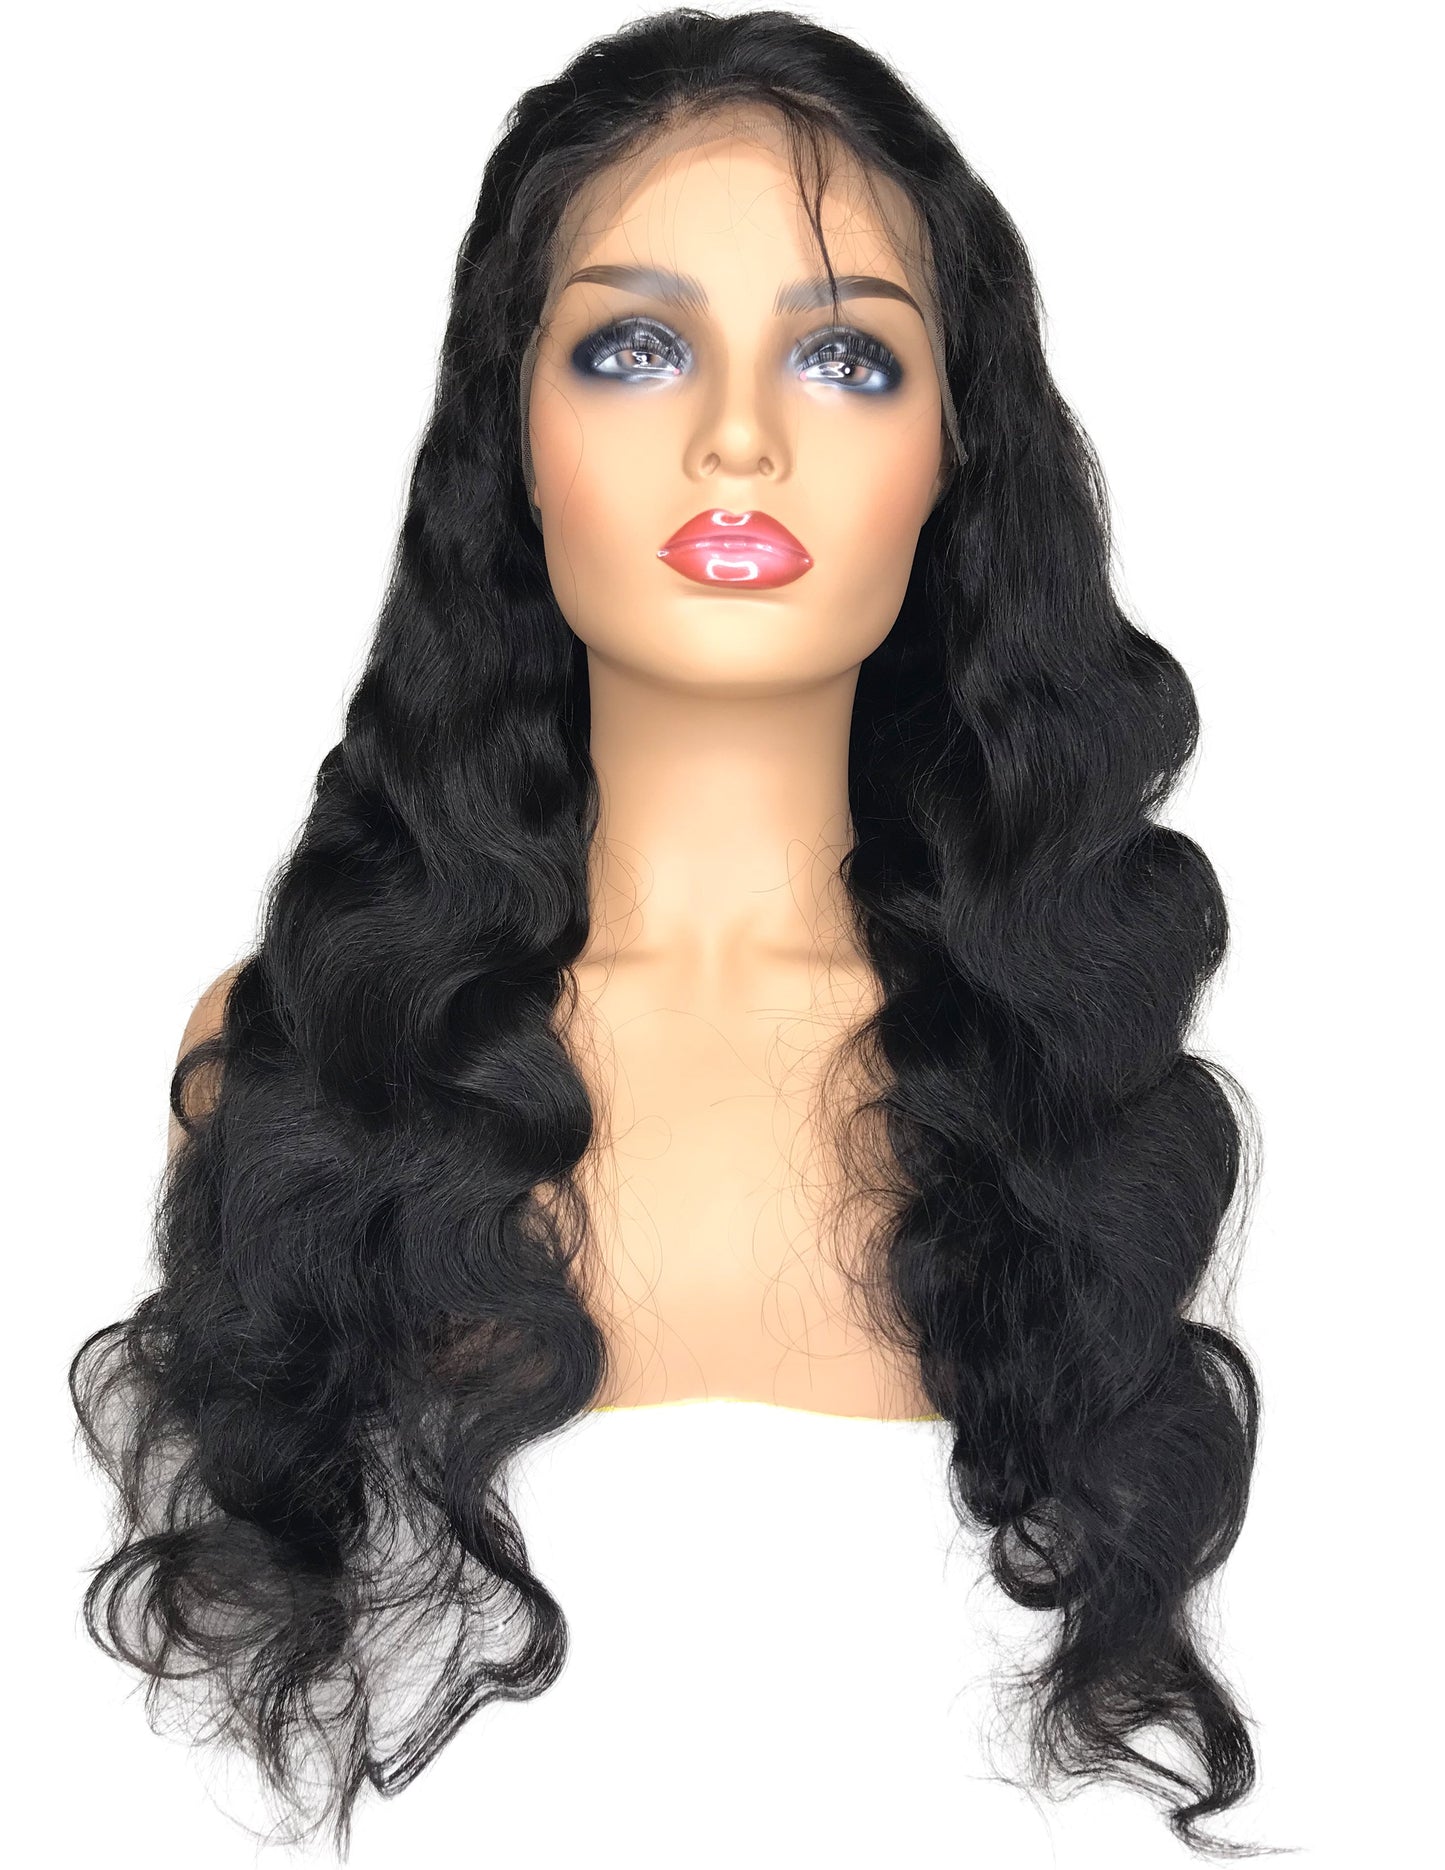 Load image into Gallery viewer, 8A MALAYSIAN BODY WAVE 360 LACE HUMAN HAIR WIG - eHair Outlet
